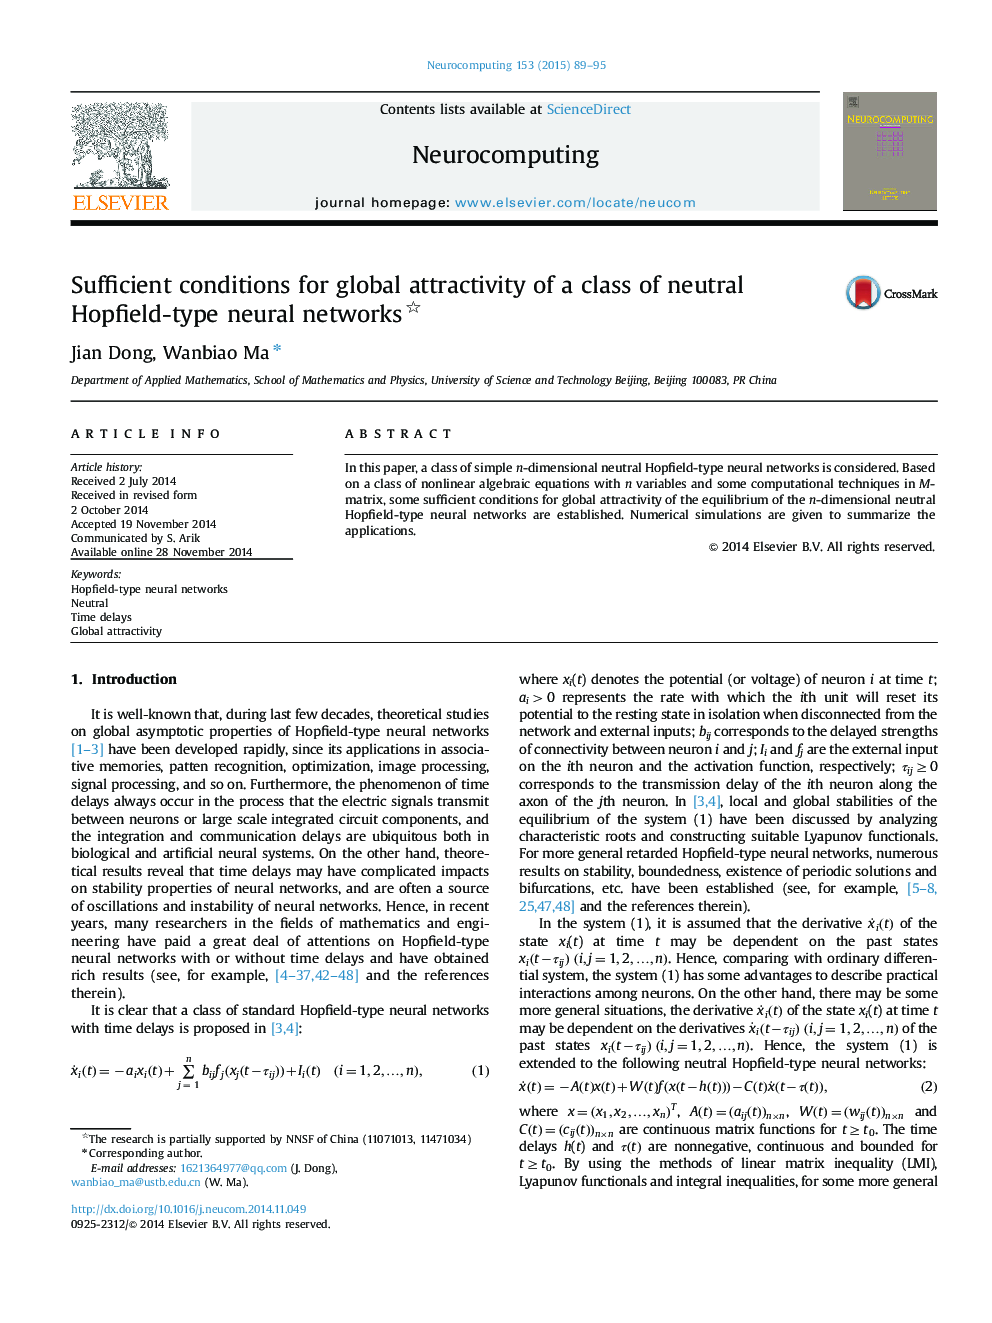 Sufficient conditions for global attractivity of a class of neutral Hopfield-type neural networks 